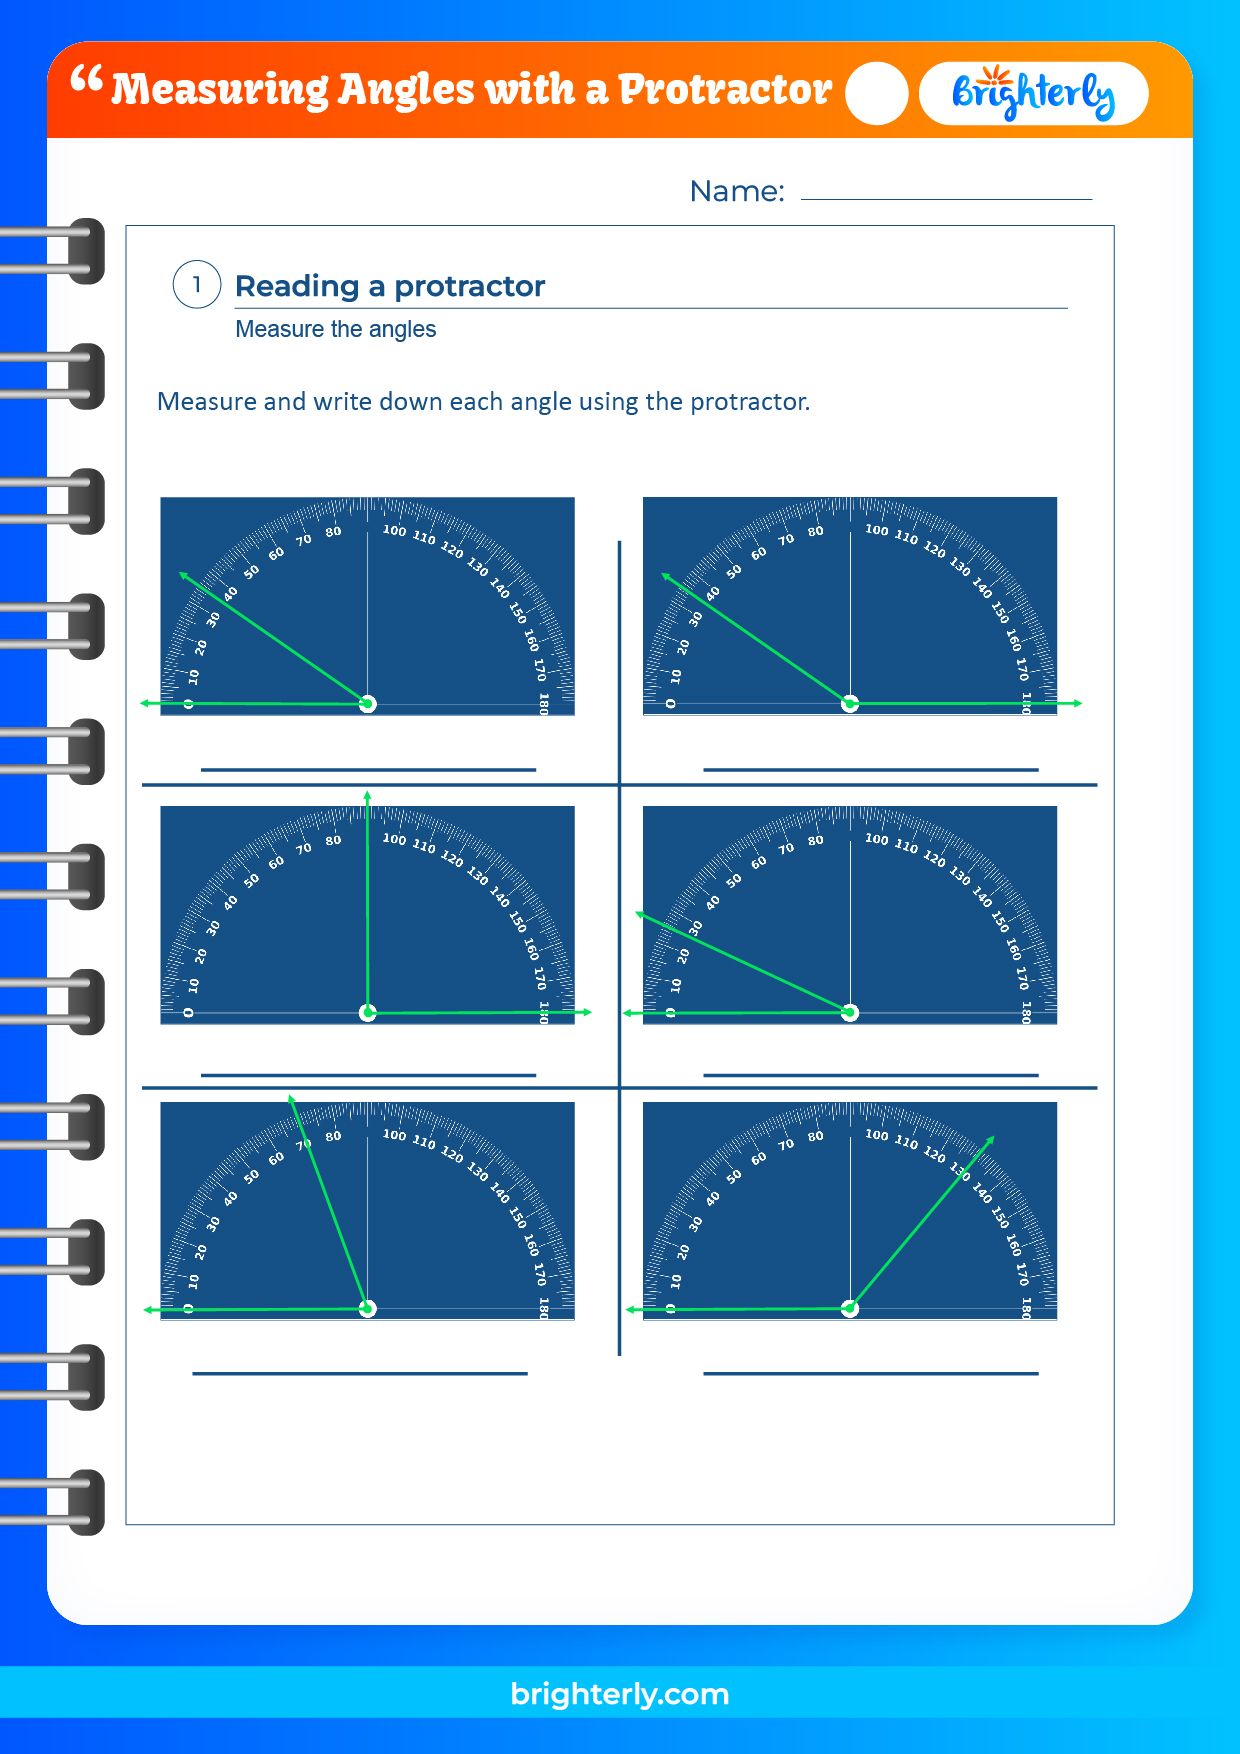 Free Measuring Angles With A Protractor Worksheets [PDFs] Brighterly